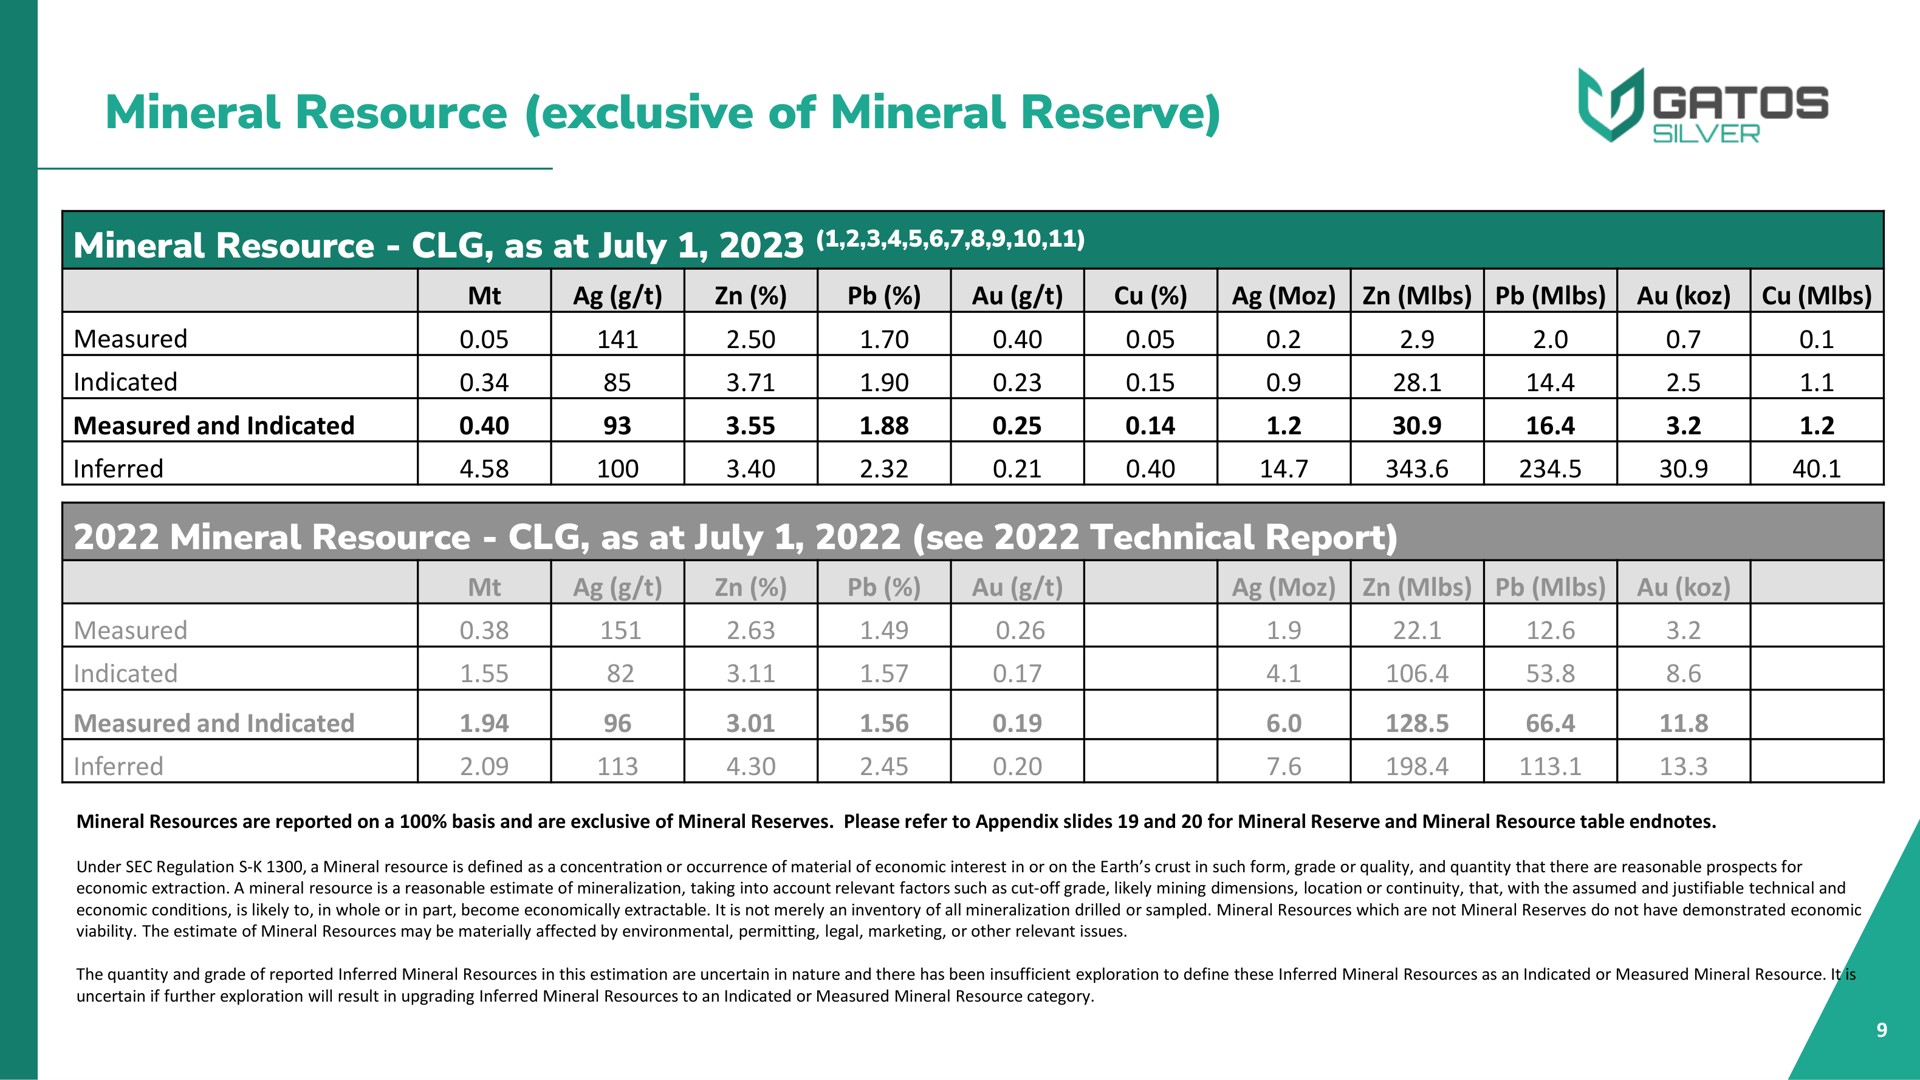 mineral resource exclusive of mineral reserve mineral resource as at mineral resource as at see technical report pit measured a indicated test mibs mibs fast ante roe faster fan auto measured a saa a indicated use oss cos us inferred oar sop tas | Gatos Silver